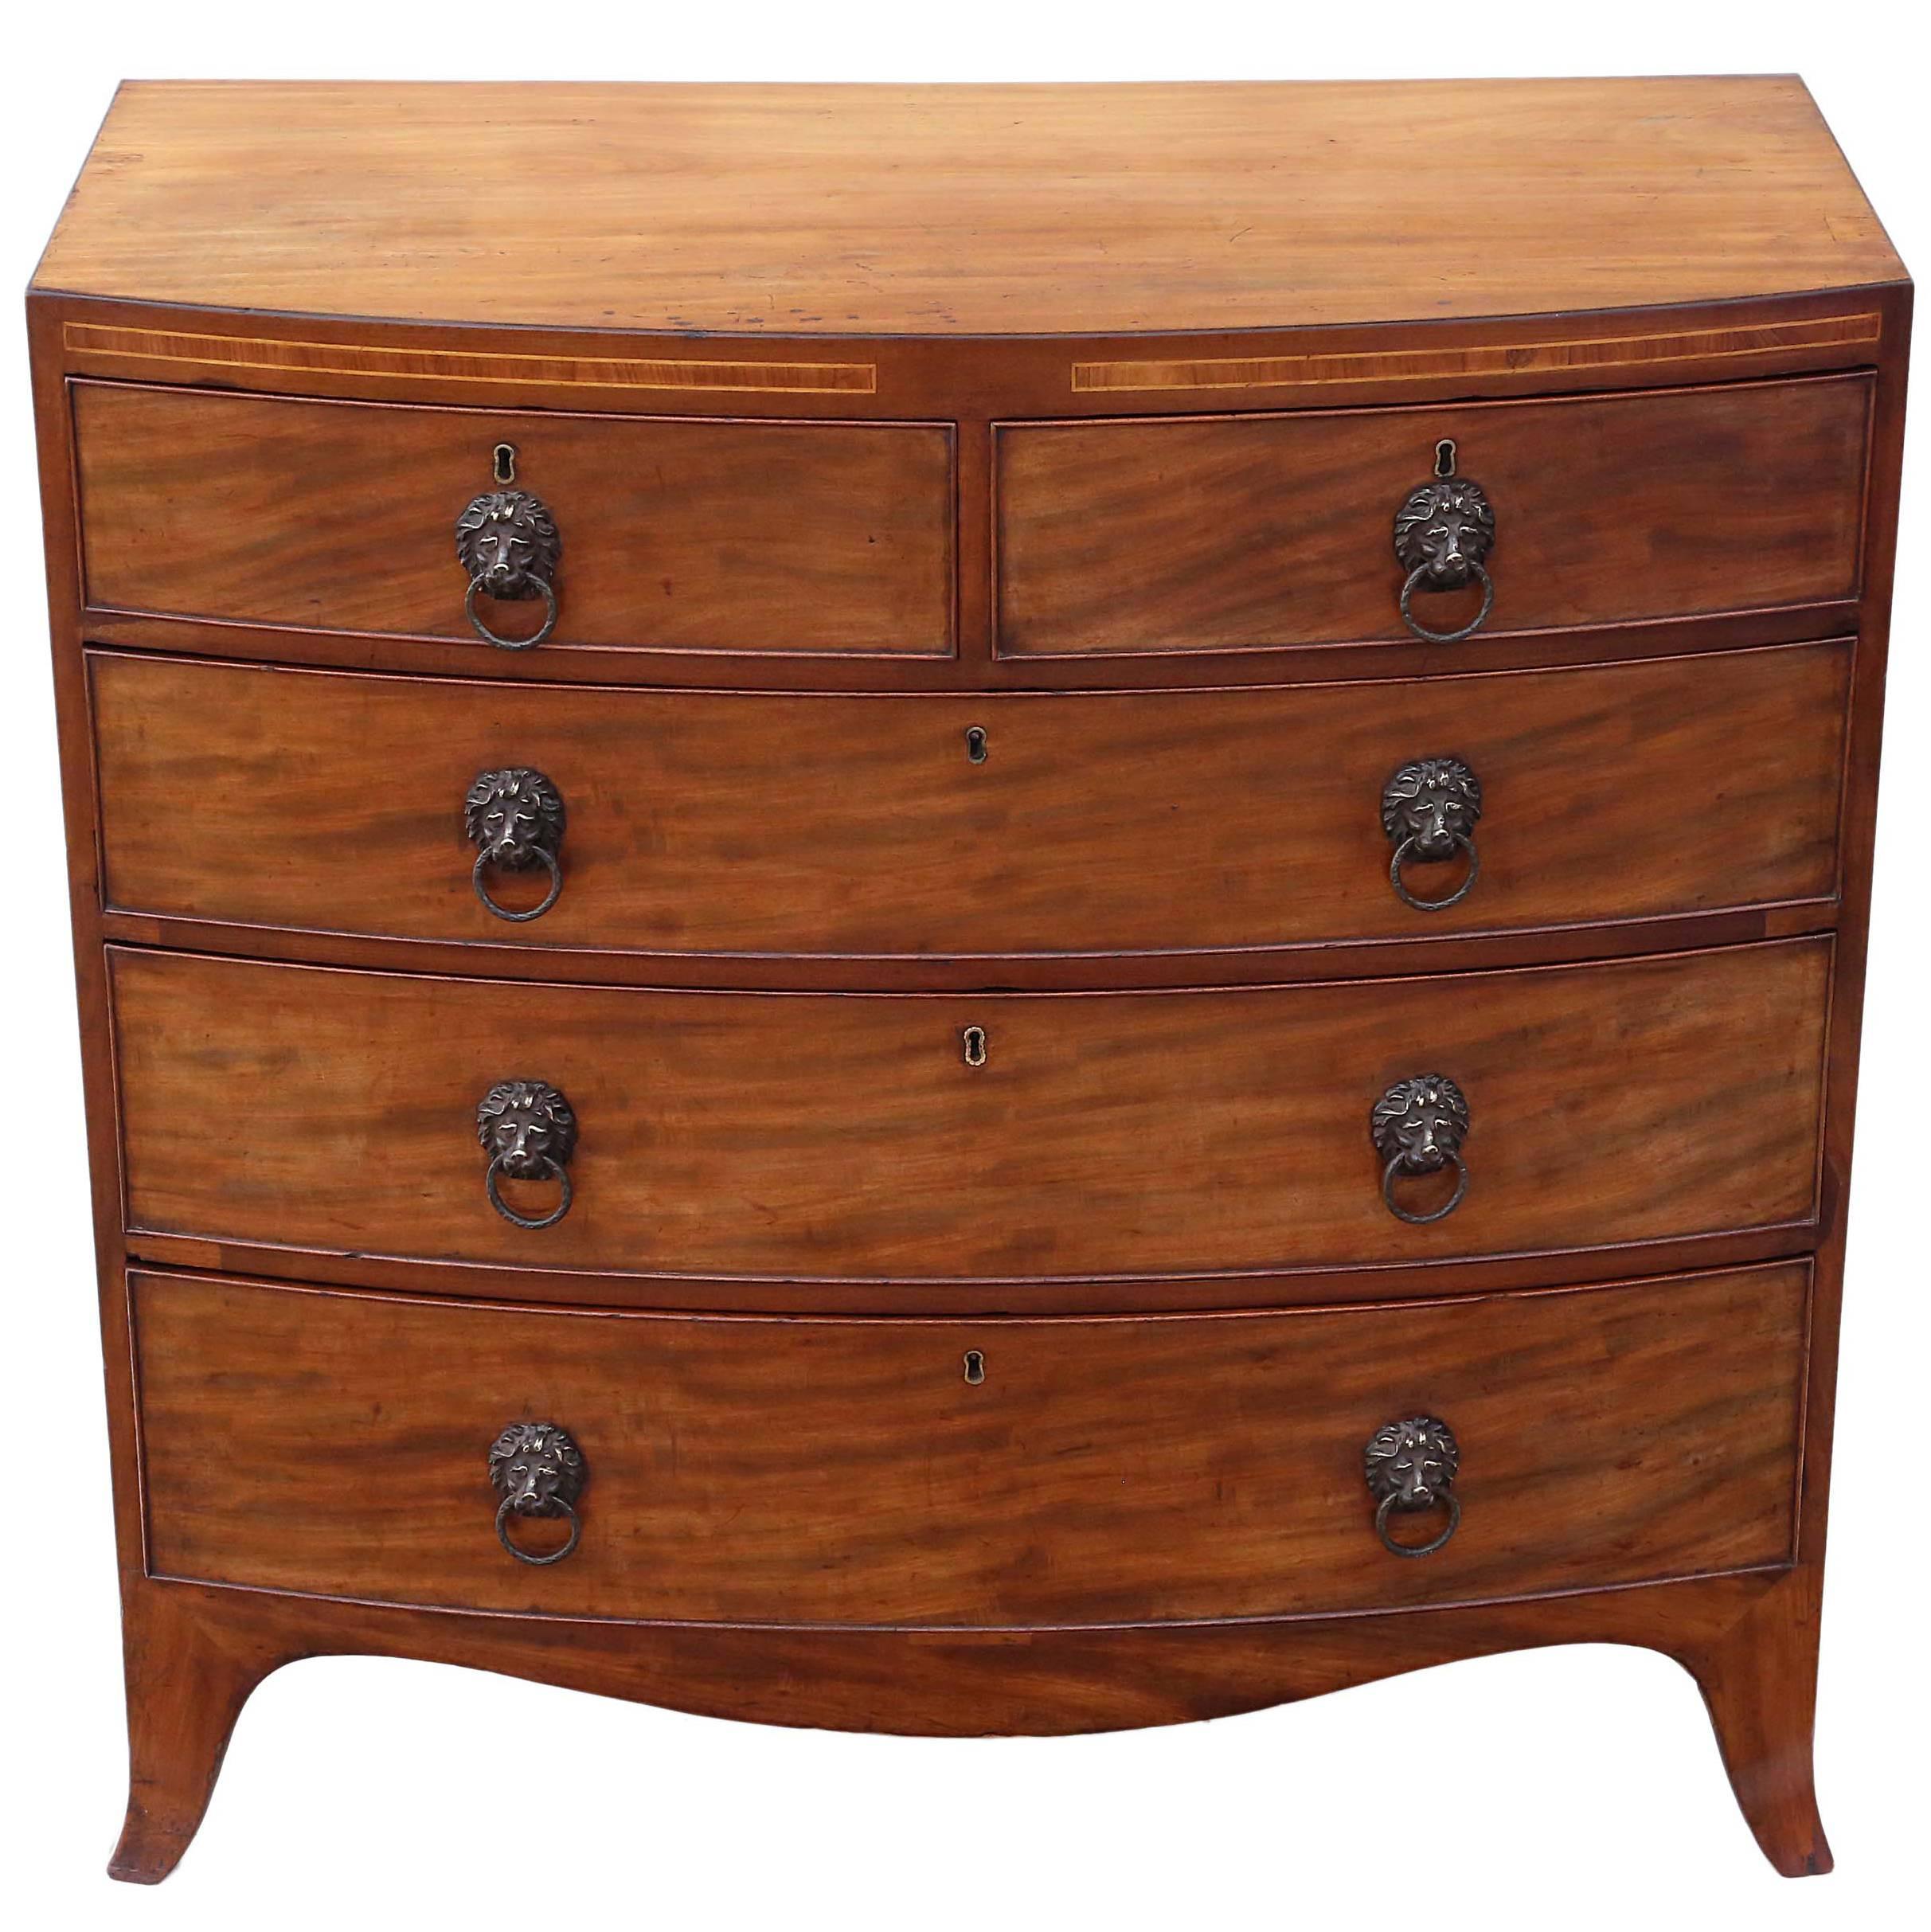 Antique Quality Regency Bow Front Flame Mahogany Chest of Drawers, circa 1820